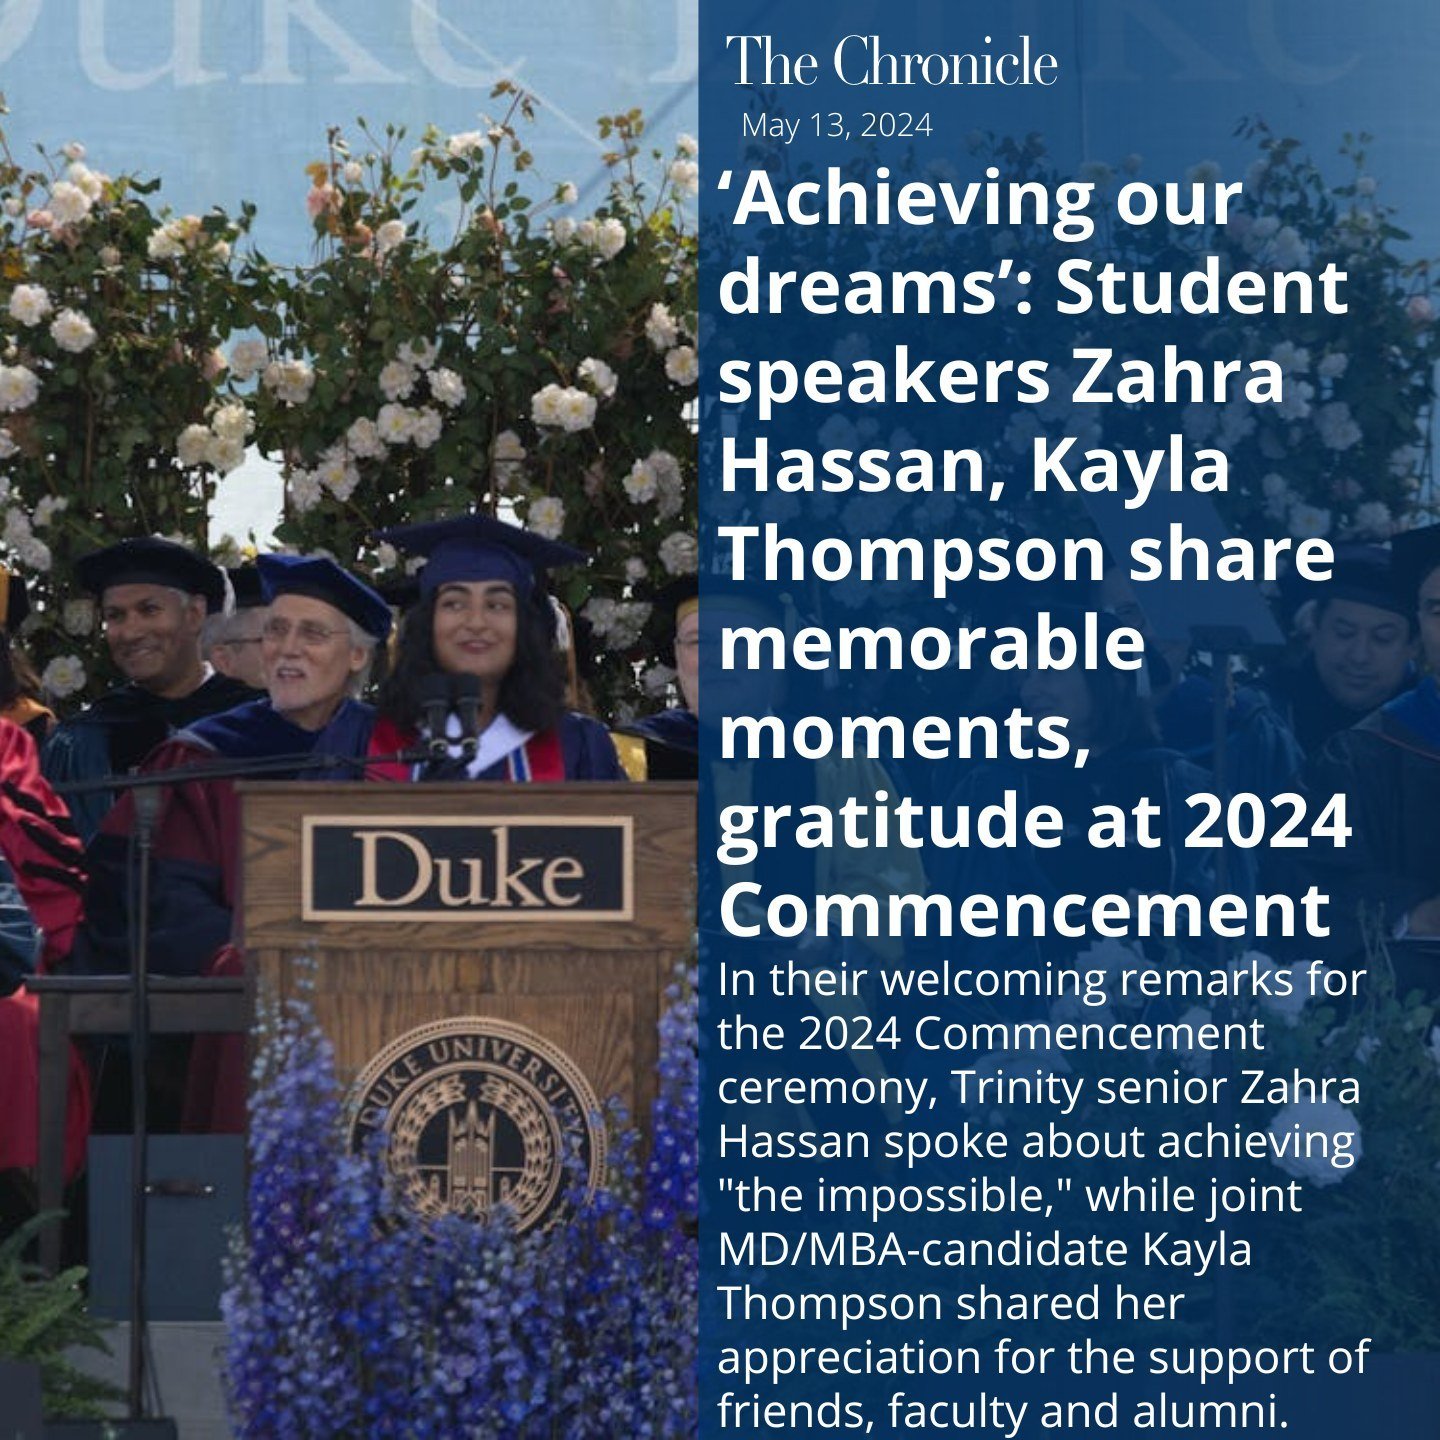 Trinity senior Zahra Hassan and joint MD/MBA-candidate Kayla Thompson delivered welcoming remarks at the 2024 Commencement Ceremony.

Hassan, who was selected to represent undergraduate students, is graduating with a Bachelor of Science in economics 